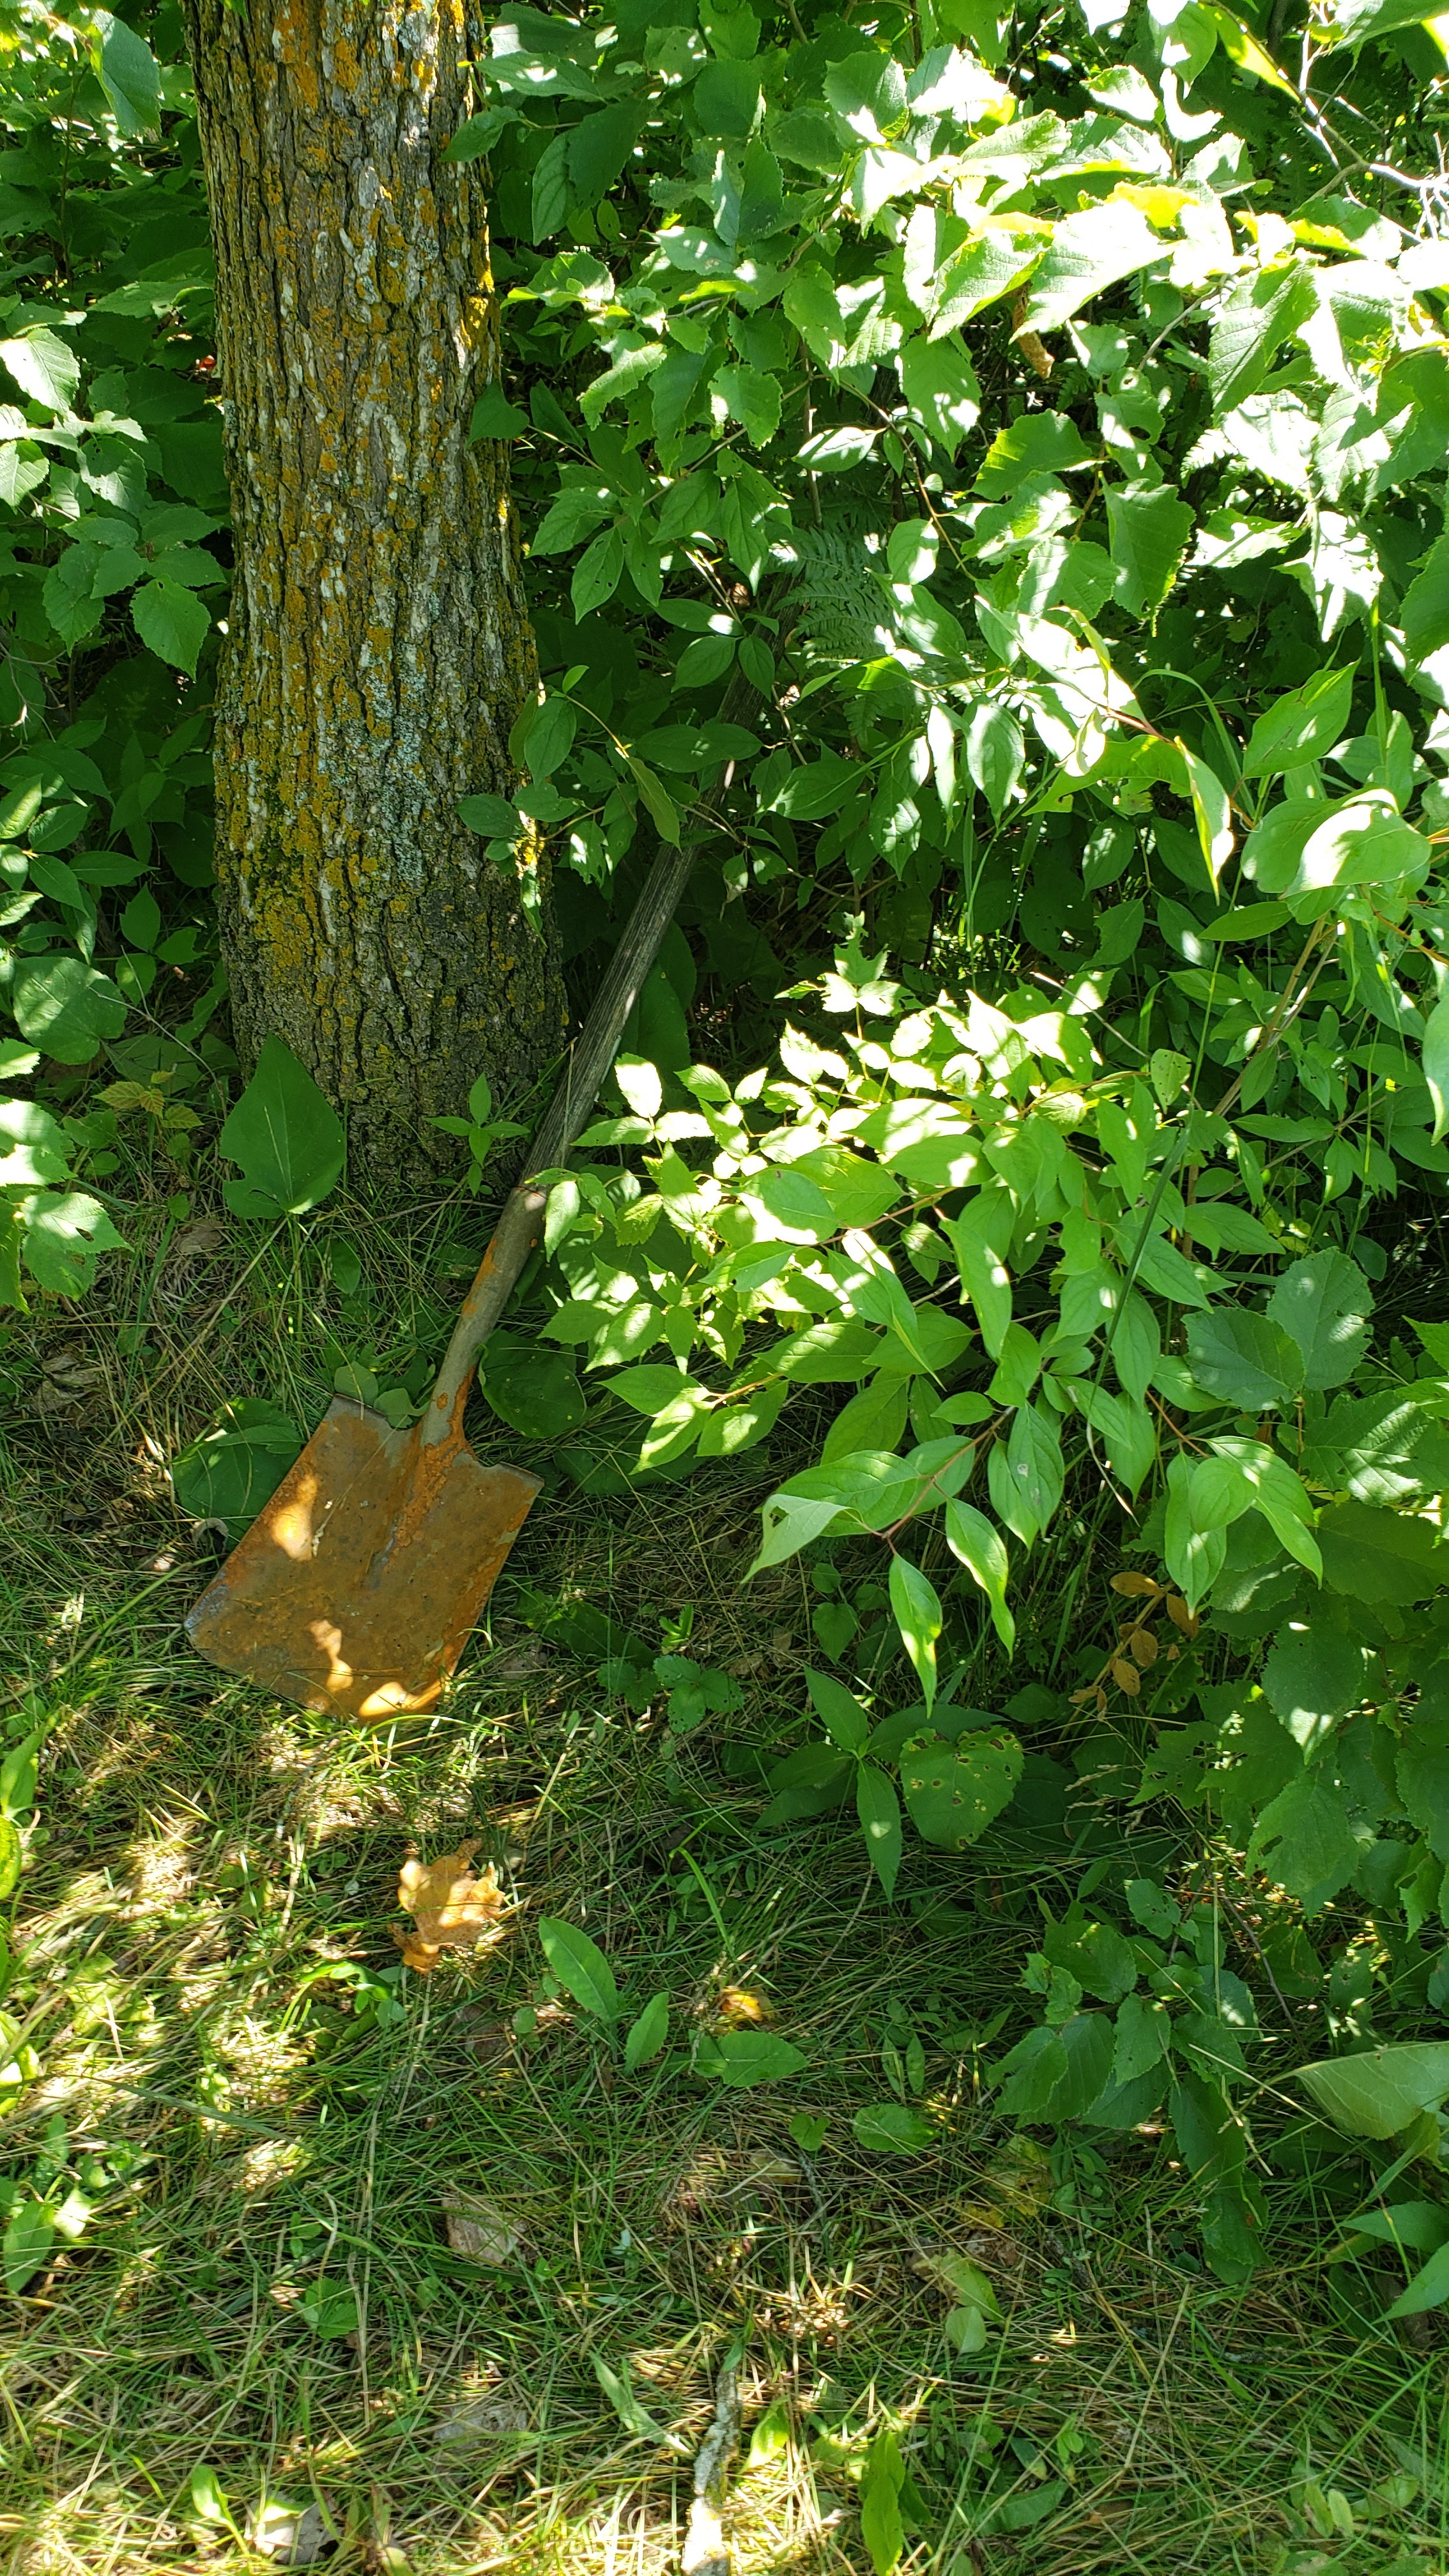 Found a shovel if someone is missing it.